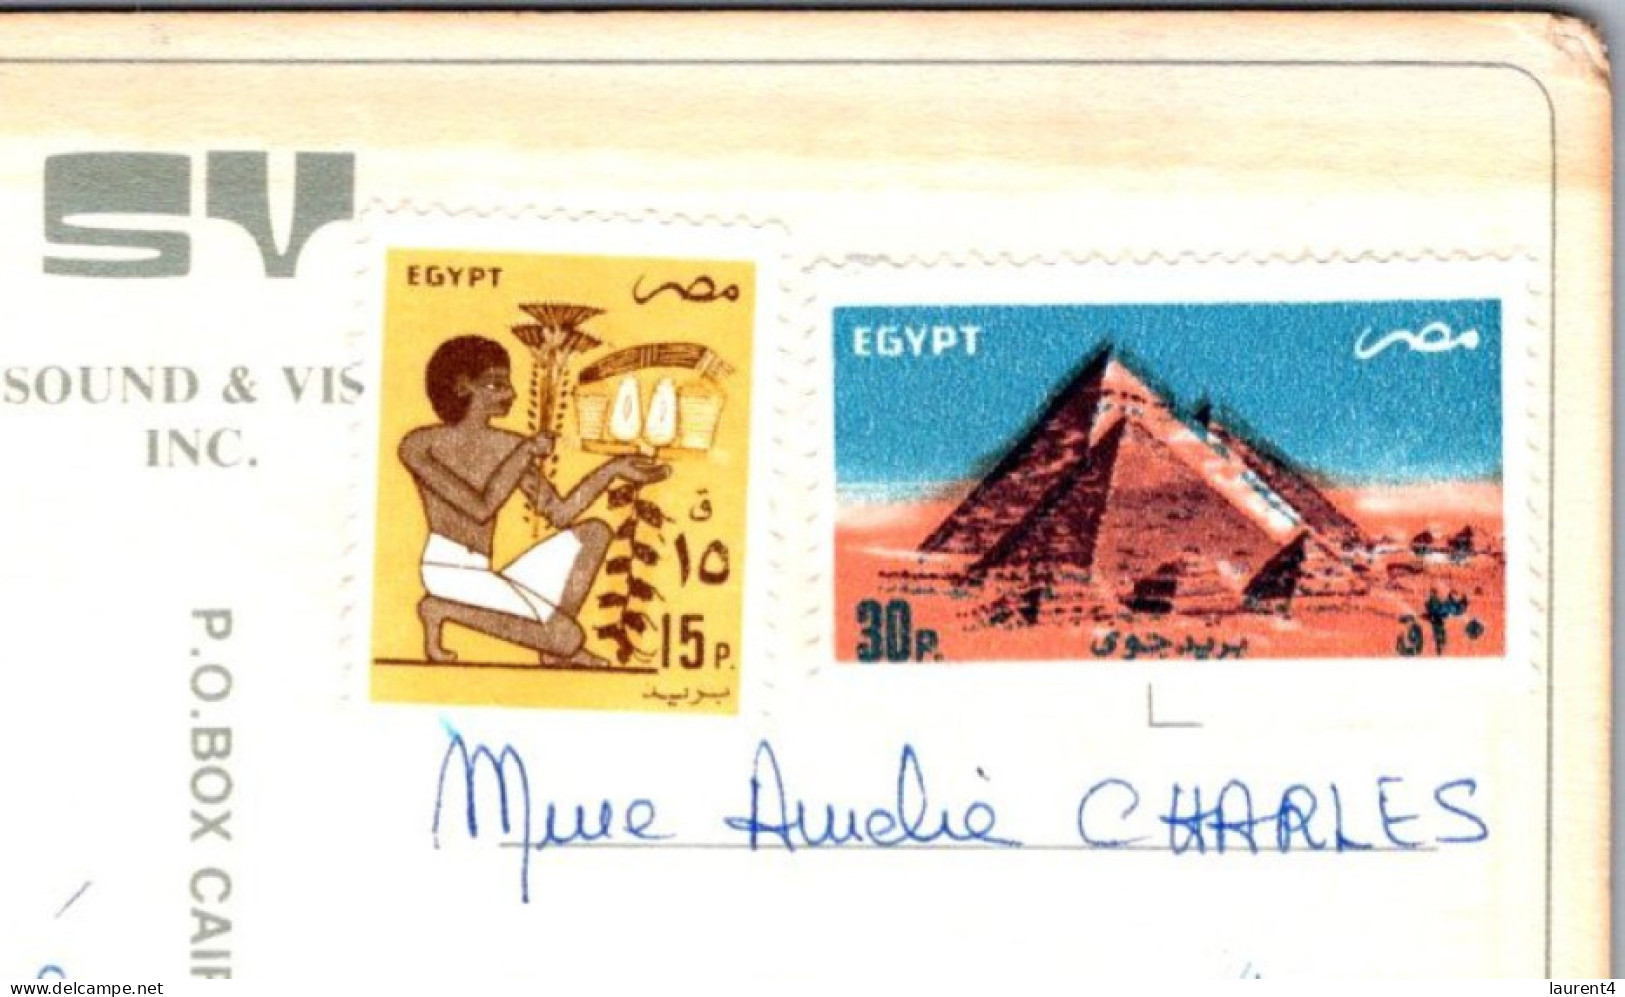 (1 R 12) Egypt (17 X 12 Cm) - Sphinx (posted To France - No Postmark !) - Sphinx